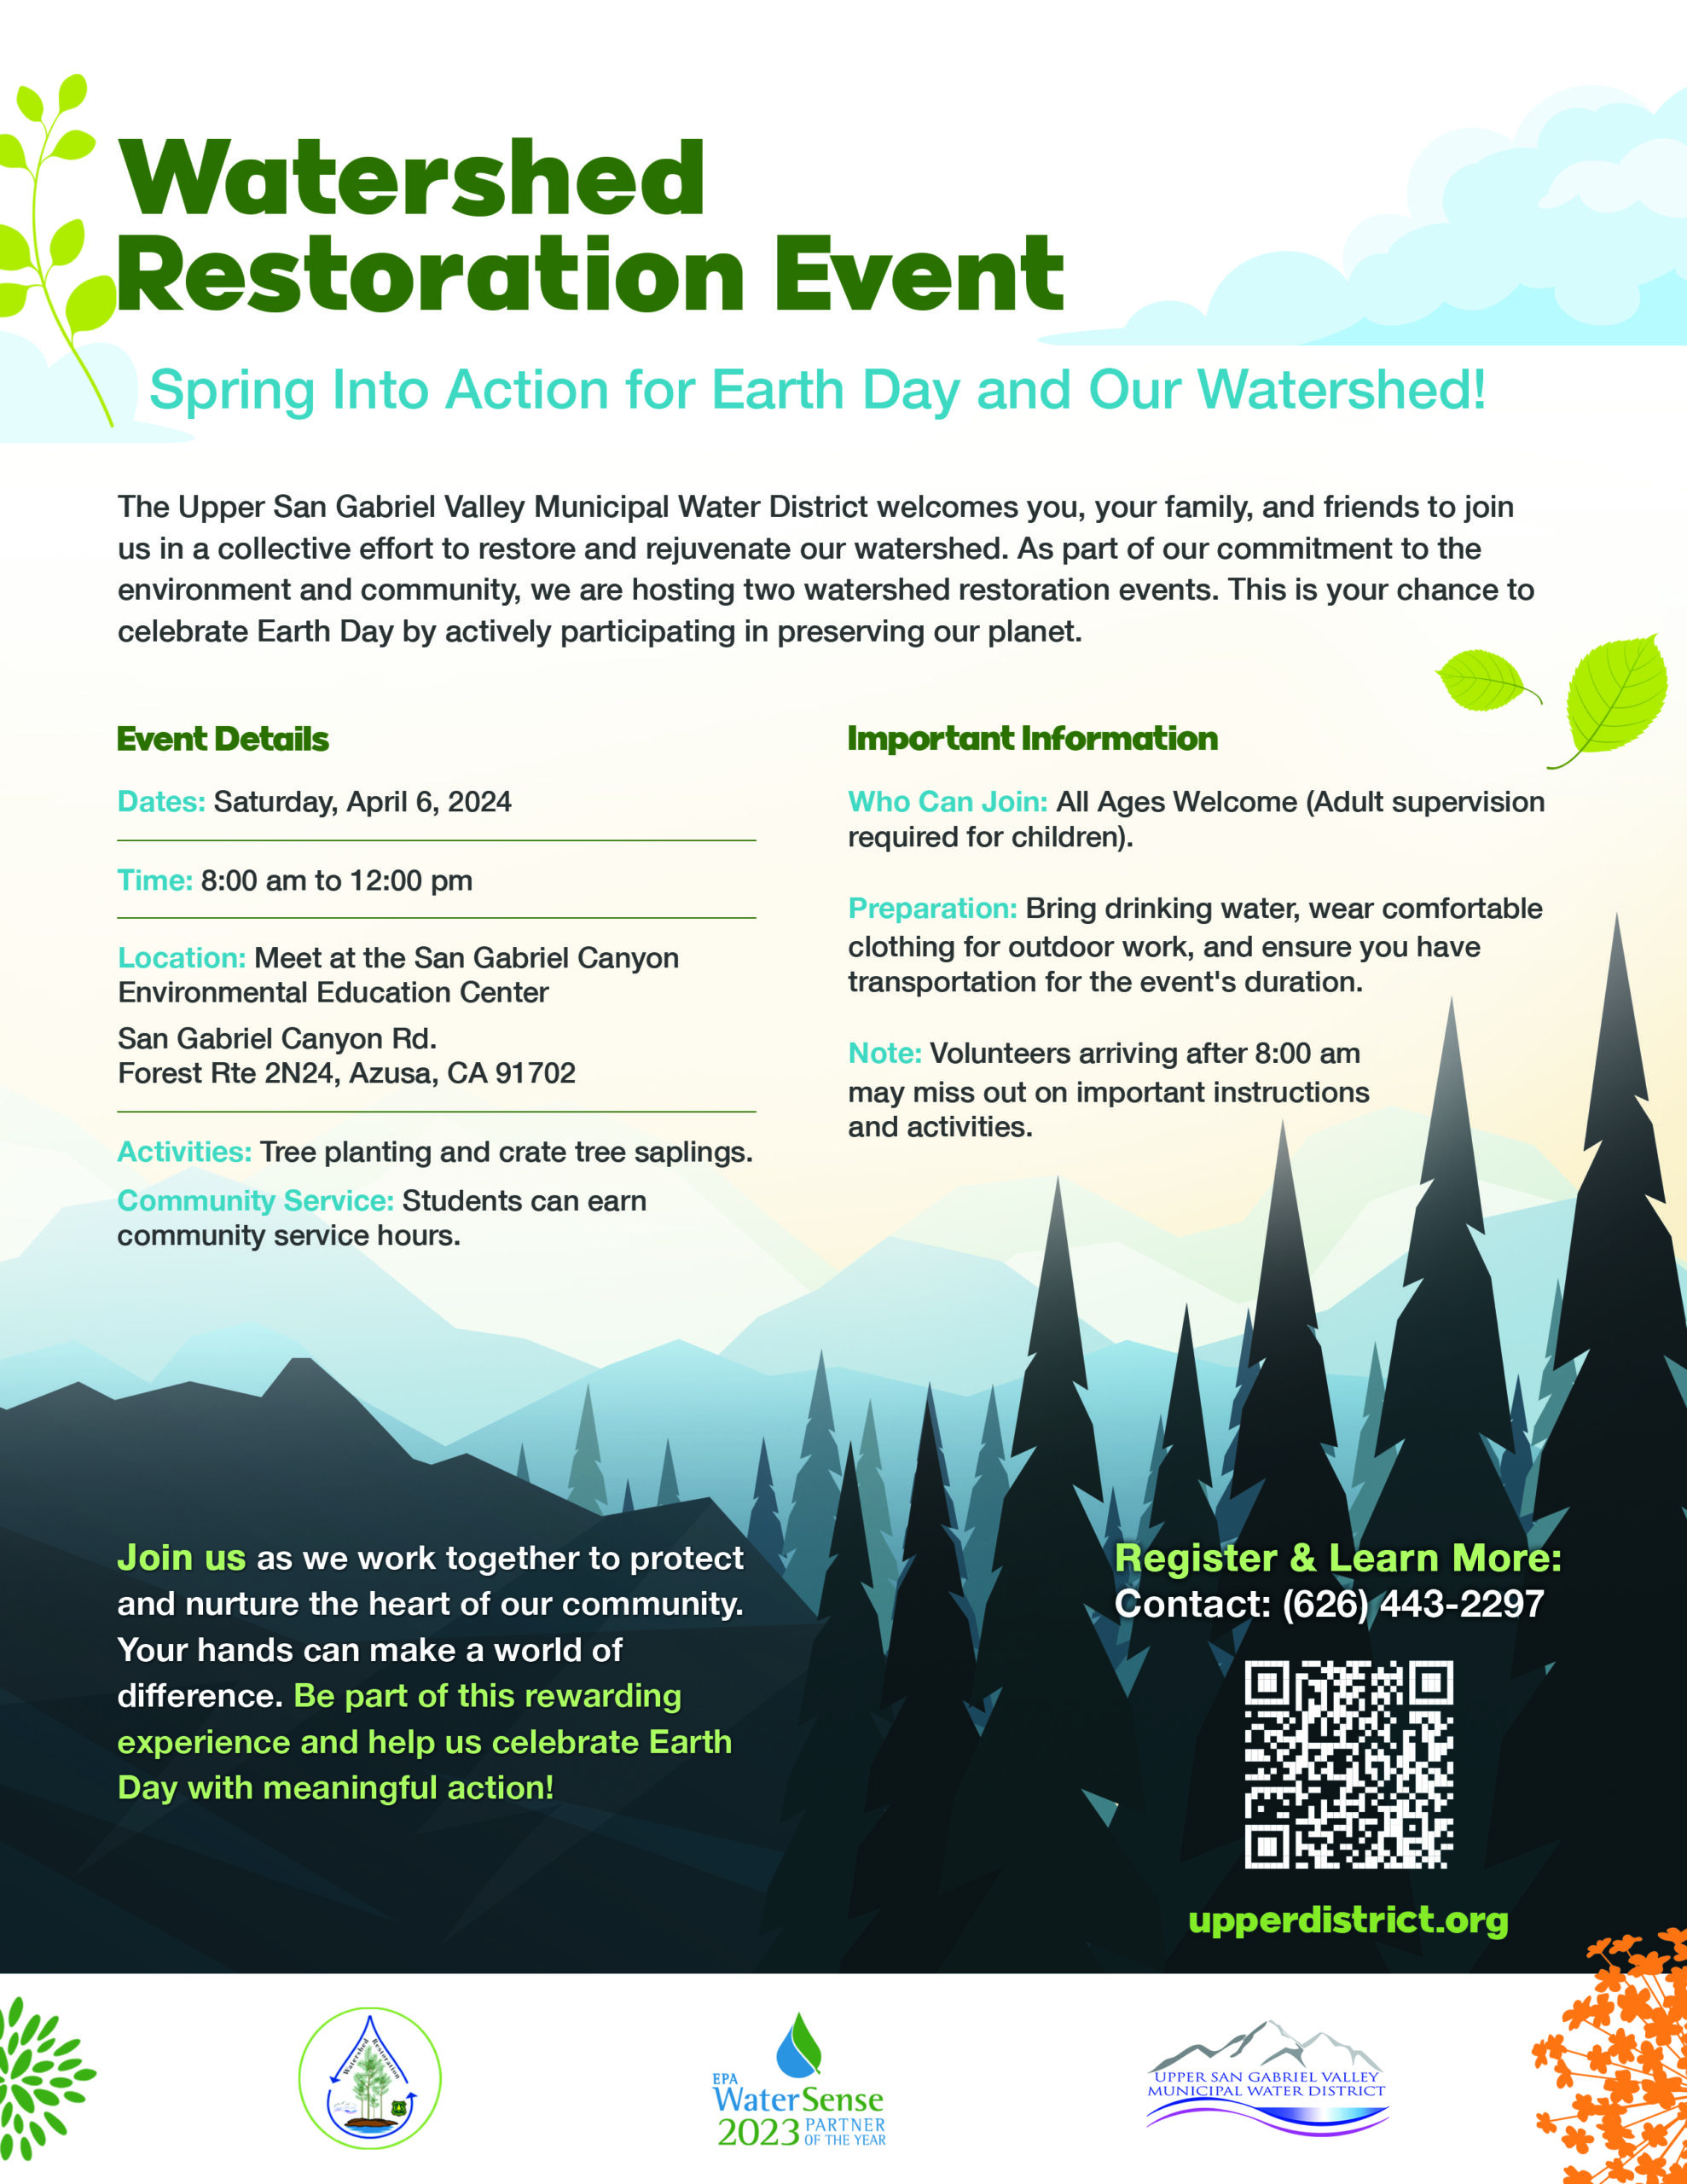 Watershed Restoration Project flyer of information showing treeline and mountains